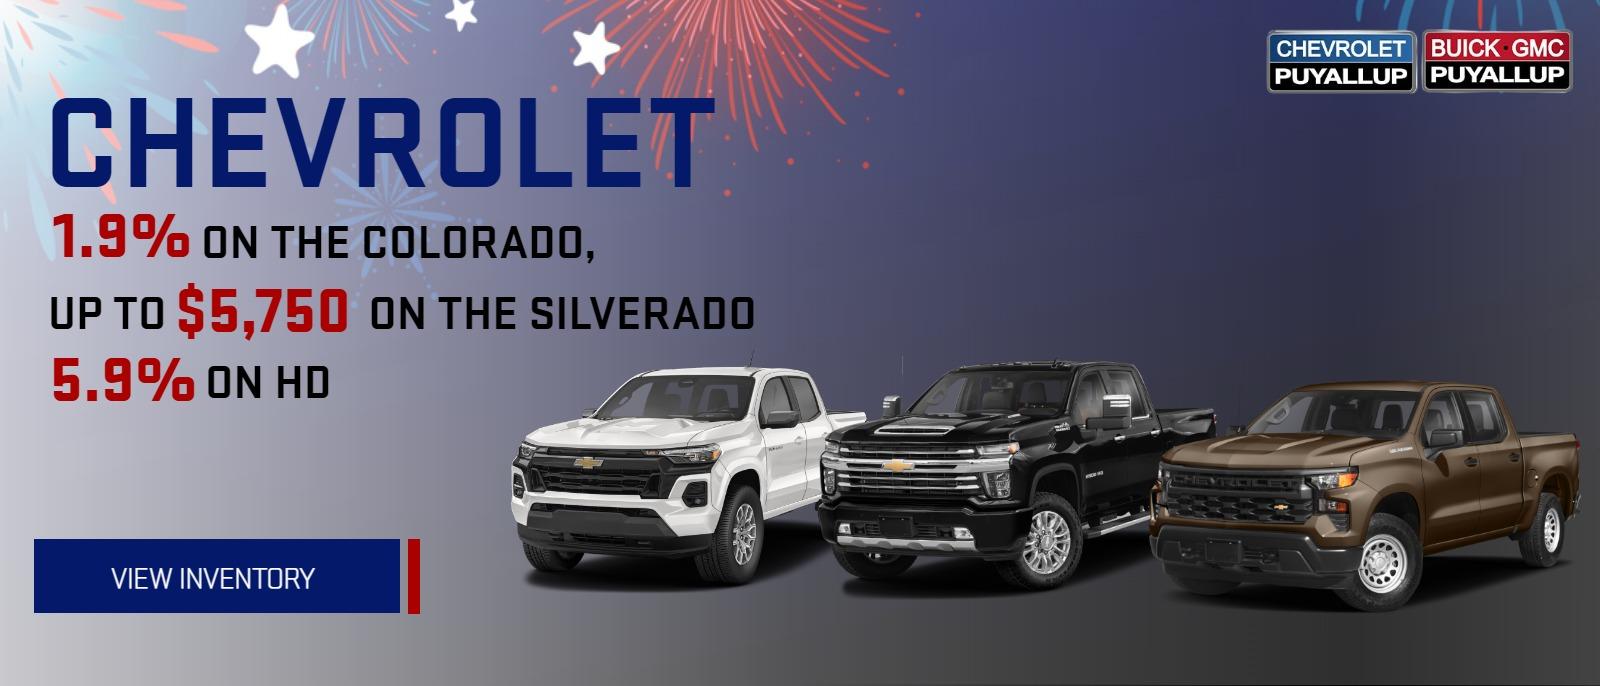 o Chevrolet: 1.9% on the Colorado, up to $5,750 on the Silverado (breakdown screenshotted below), 5.9% on HD